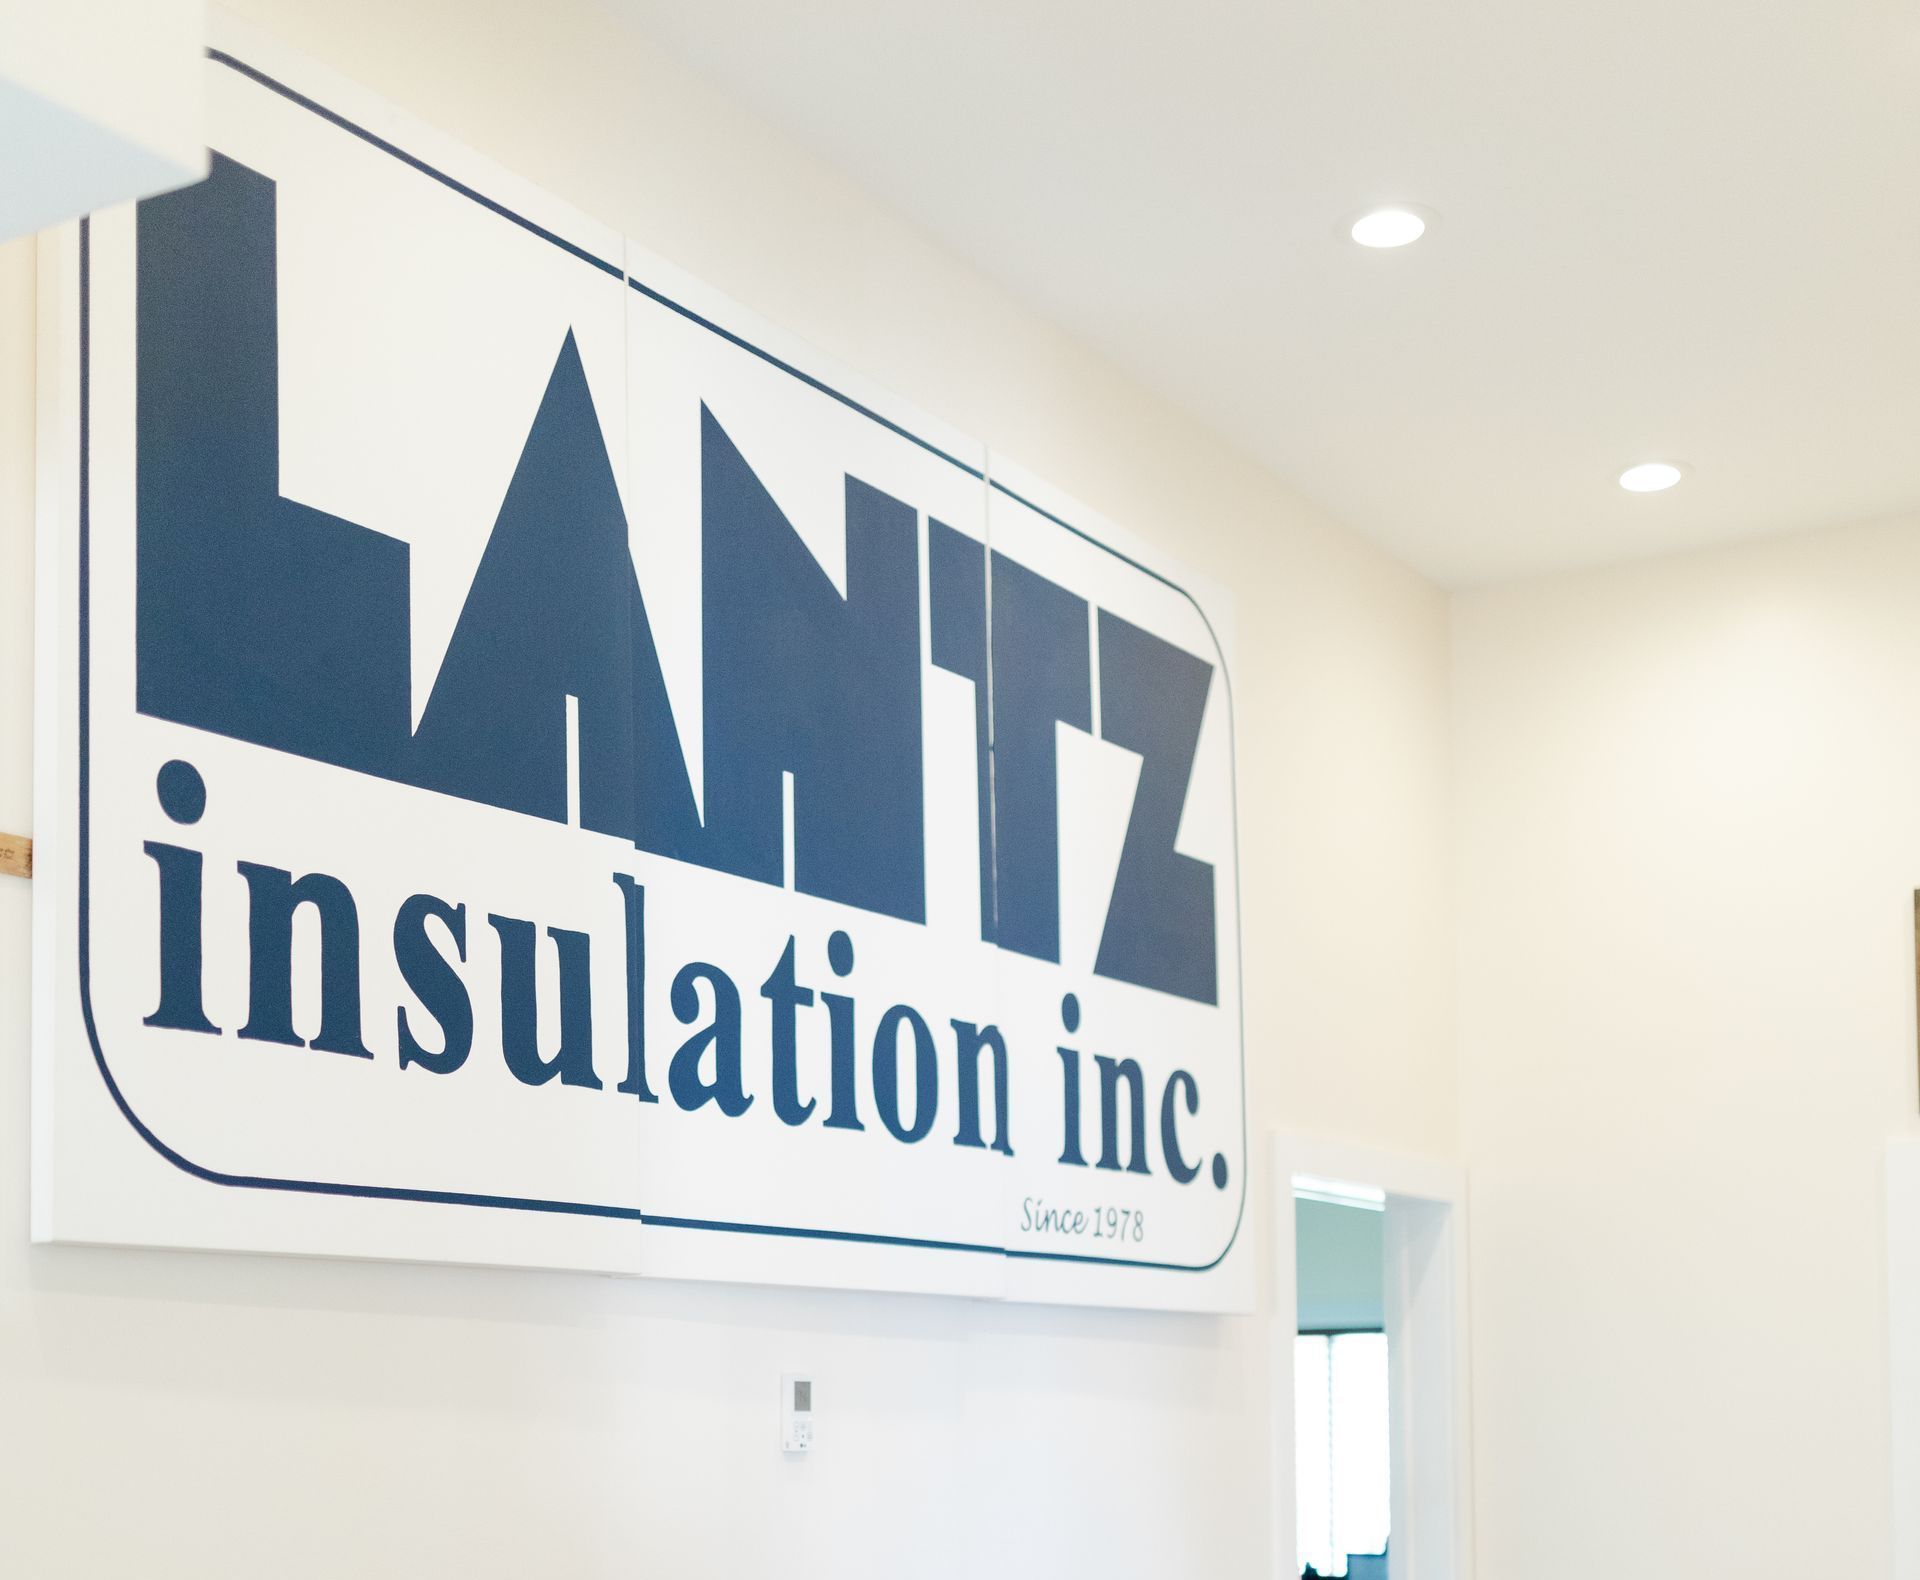 A sign for lantz insulation inc. hangs from the ceiling